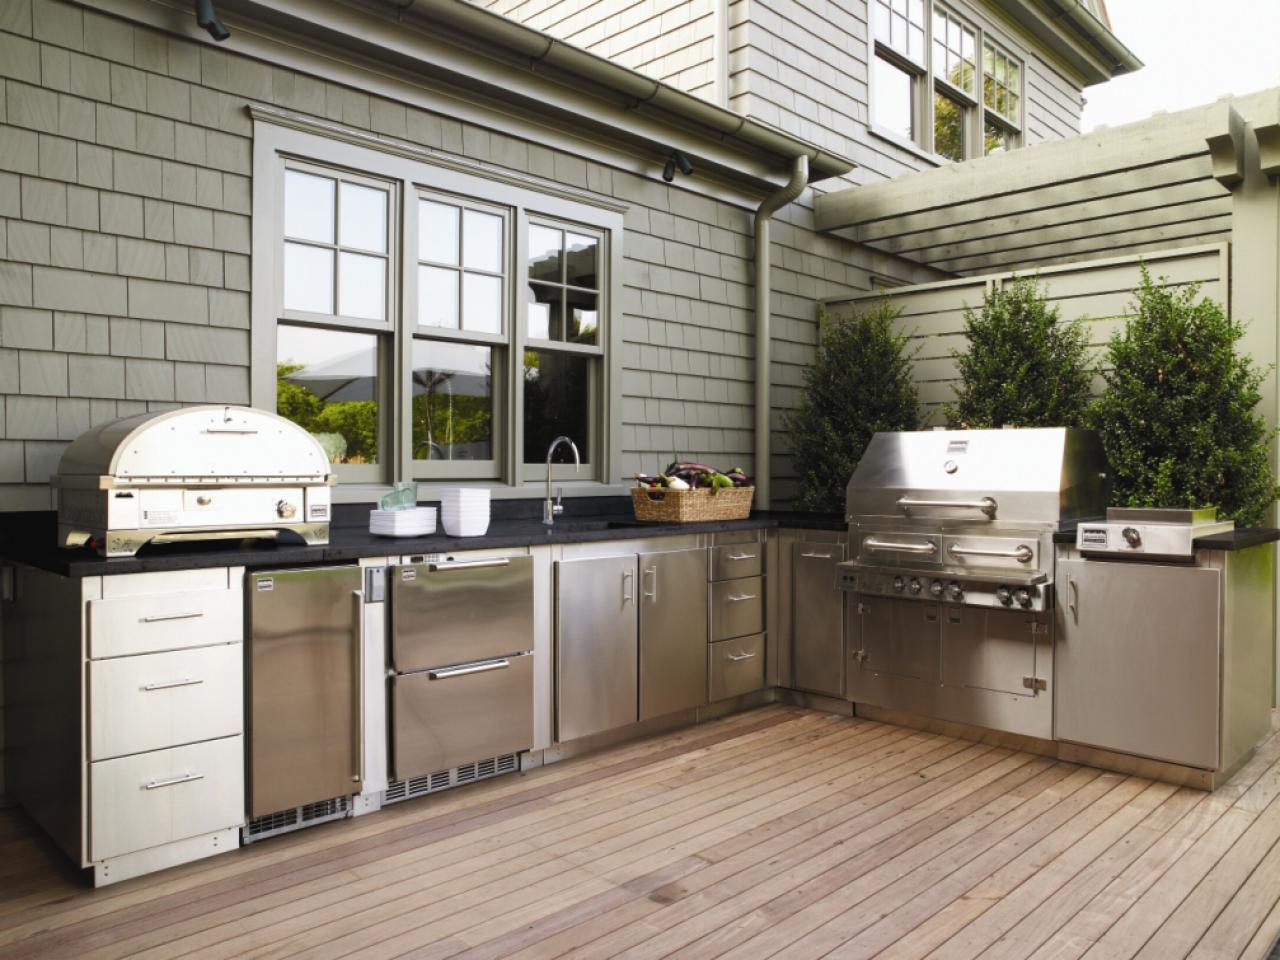 Small Outdoor Kitchen Ideas Pictures Tips From HGTV HGTV